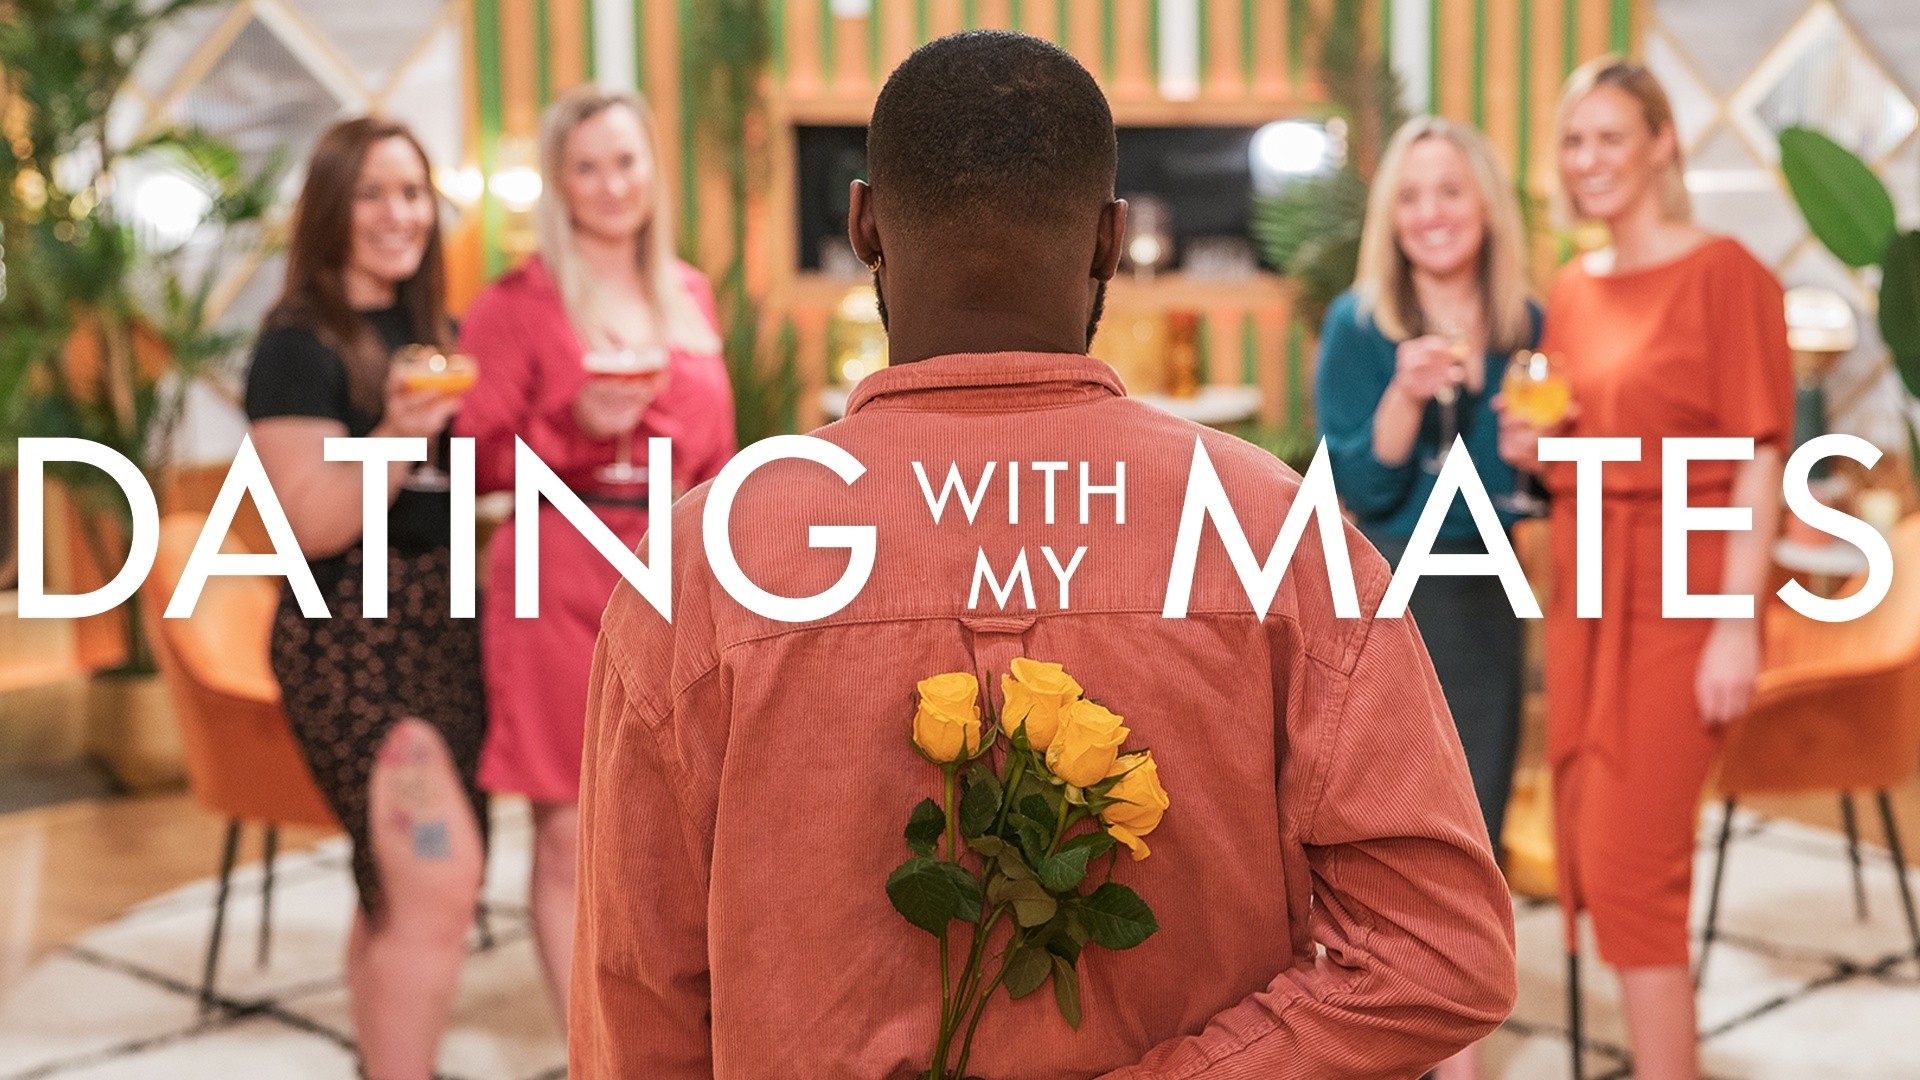 Dating with my mates - UKTV Play